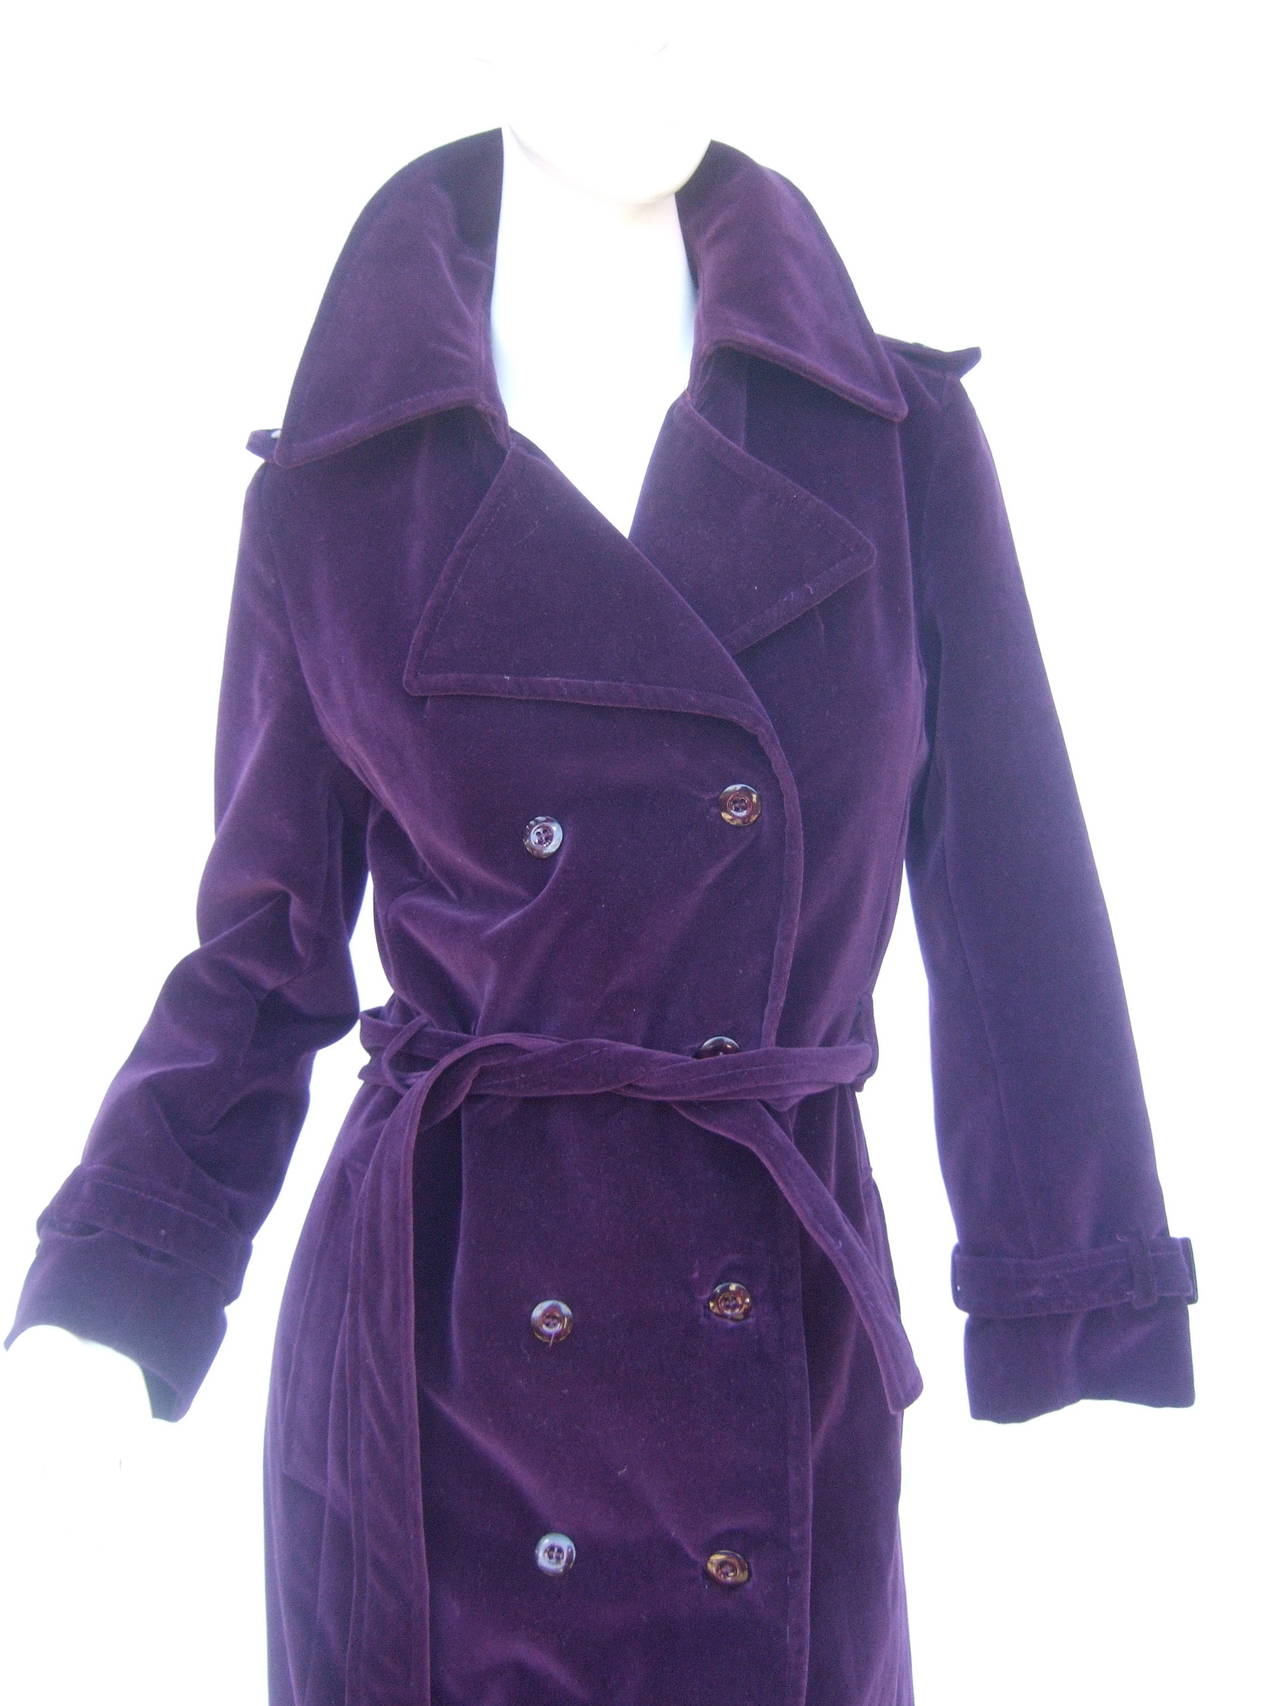 Saks Fifth Avenue Amethyst velvet belted trench coat c 1980  US Size 6
The stylish coat is designed with plush dark egg plant color purple velvet with eight resin buttons. The high fashion coat is designed with epaulet detail on the shoulders &